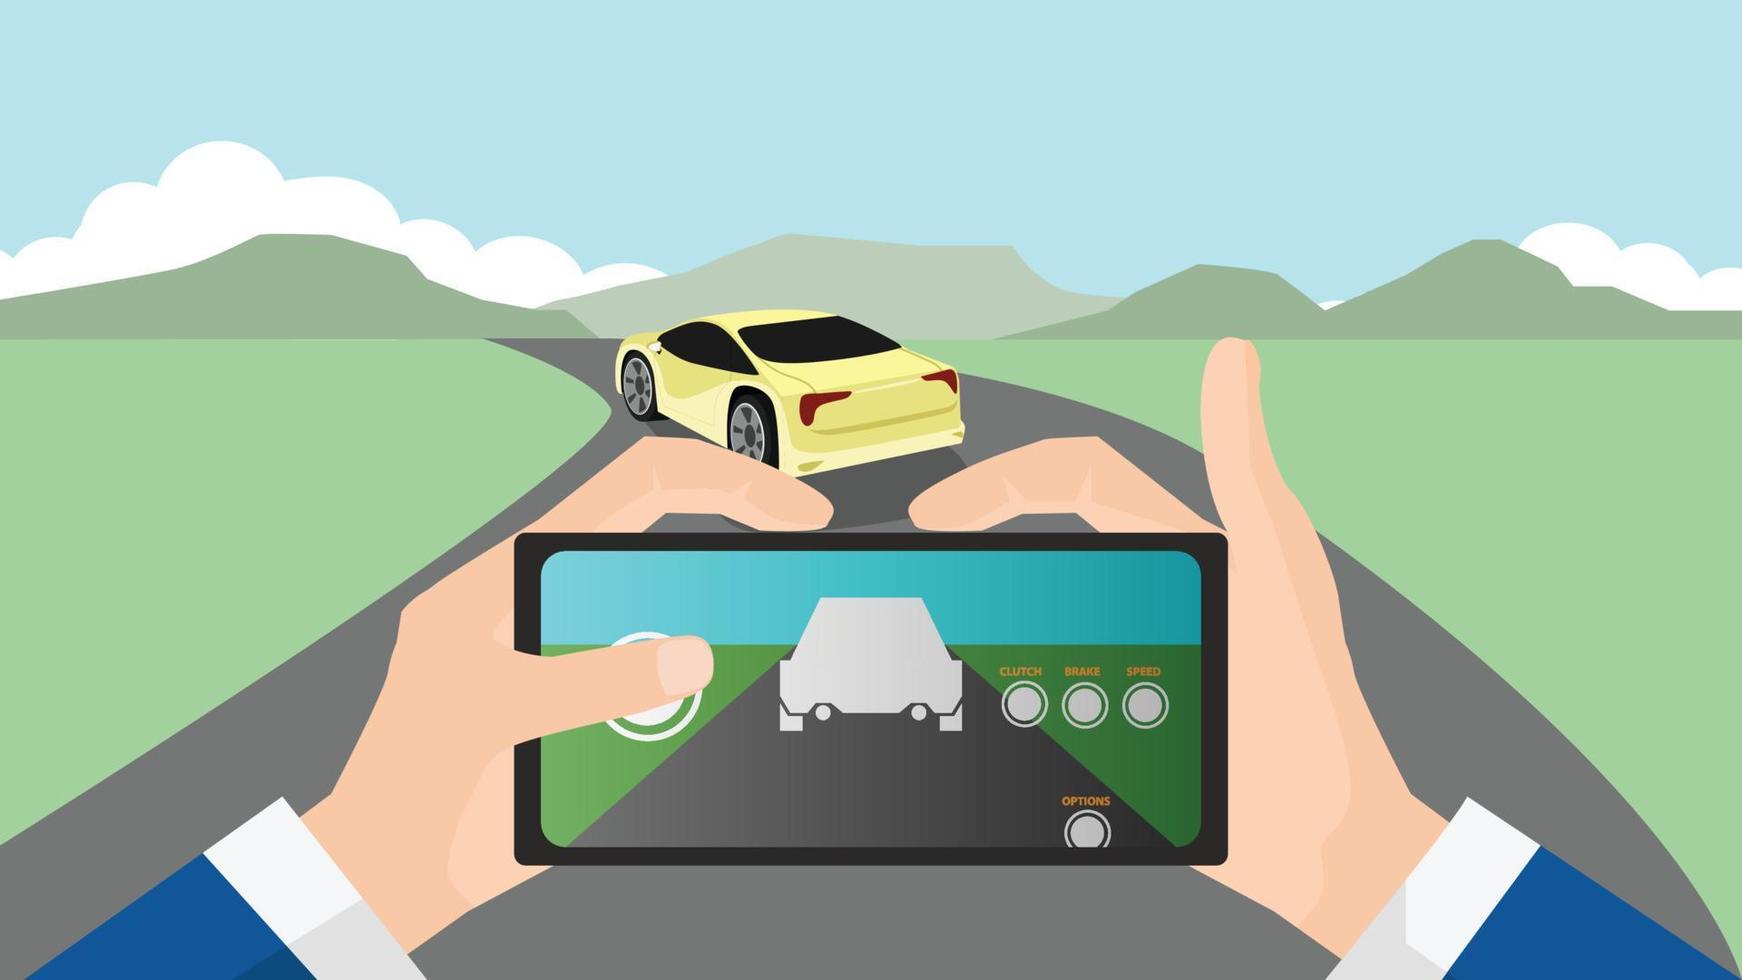 Hand of man control car by mobile phone with application car driving. Sport car yellow color on asphalt road driving to the nature of mountain on wide grassland area. vector